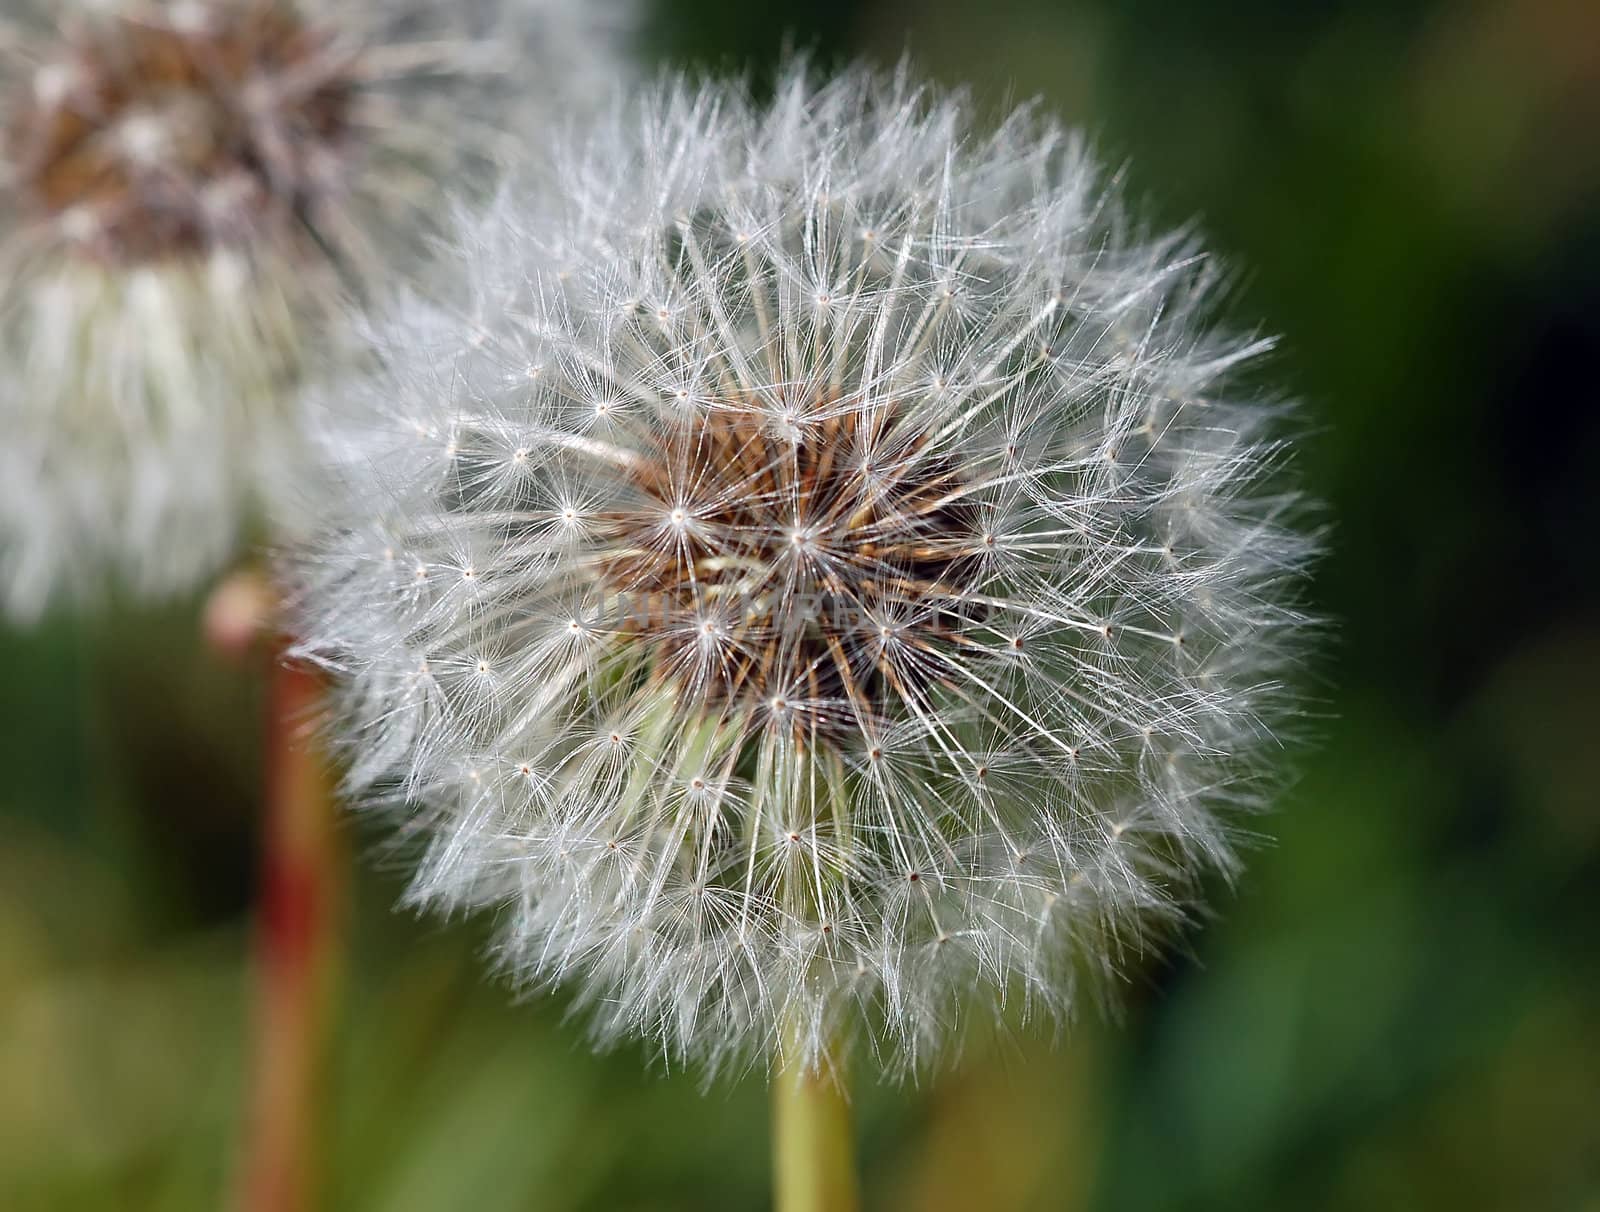 Extreme close-up of a dandelion in full bloom